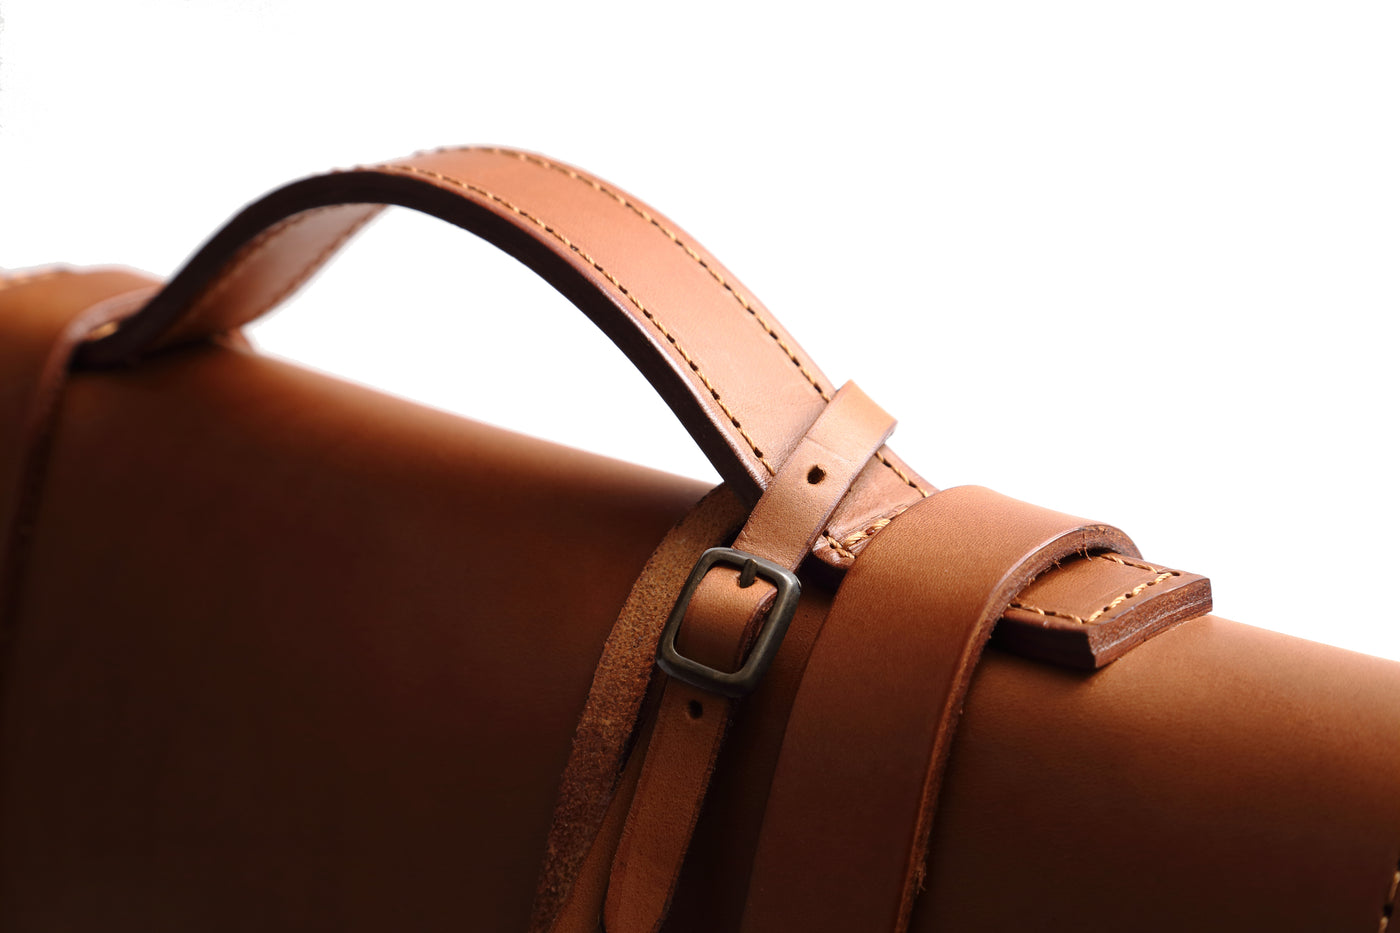 Mod 125 Business Bag Cuoio Brown